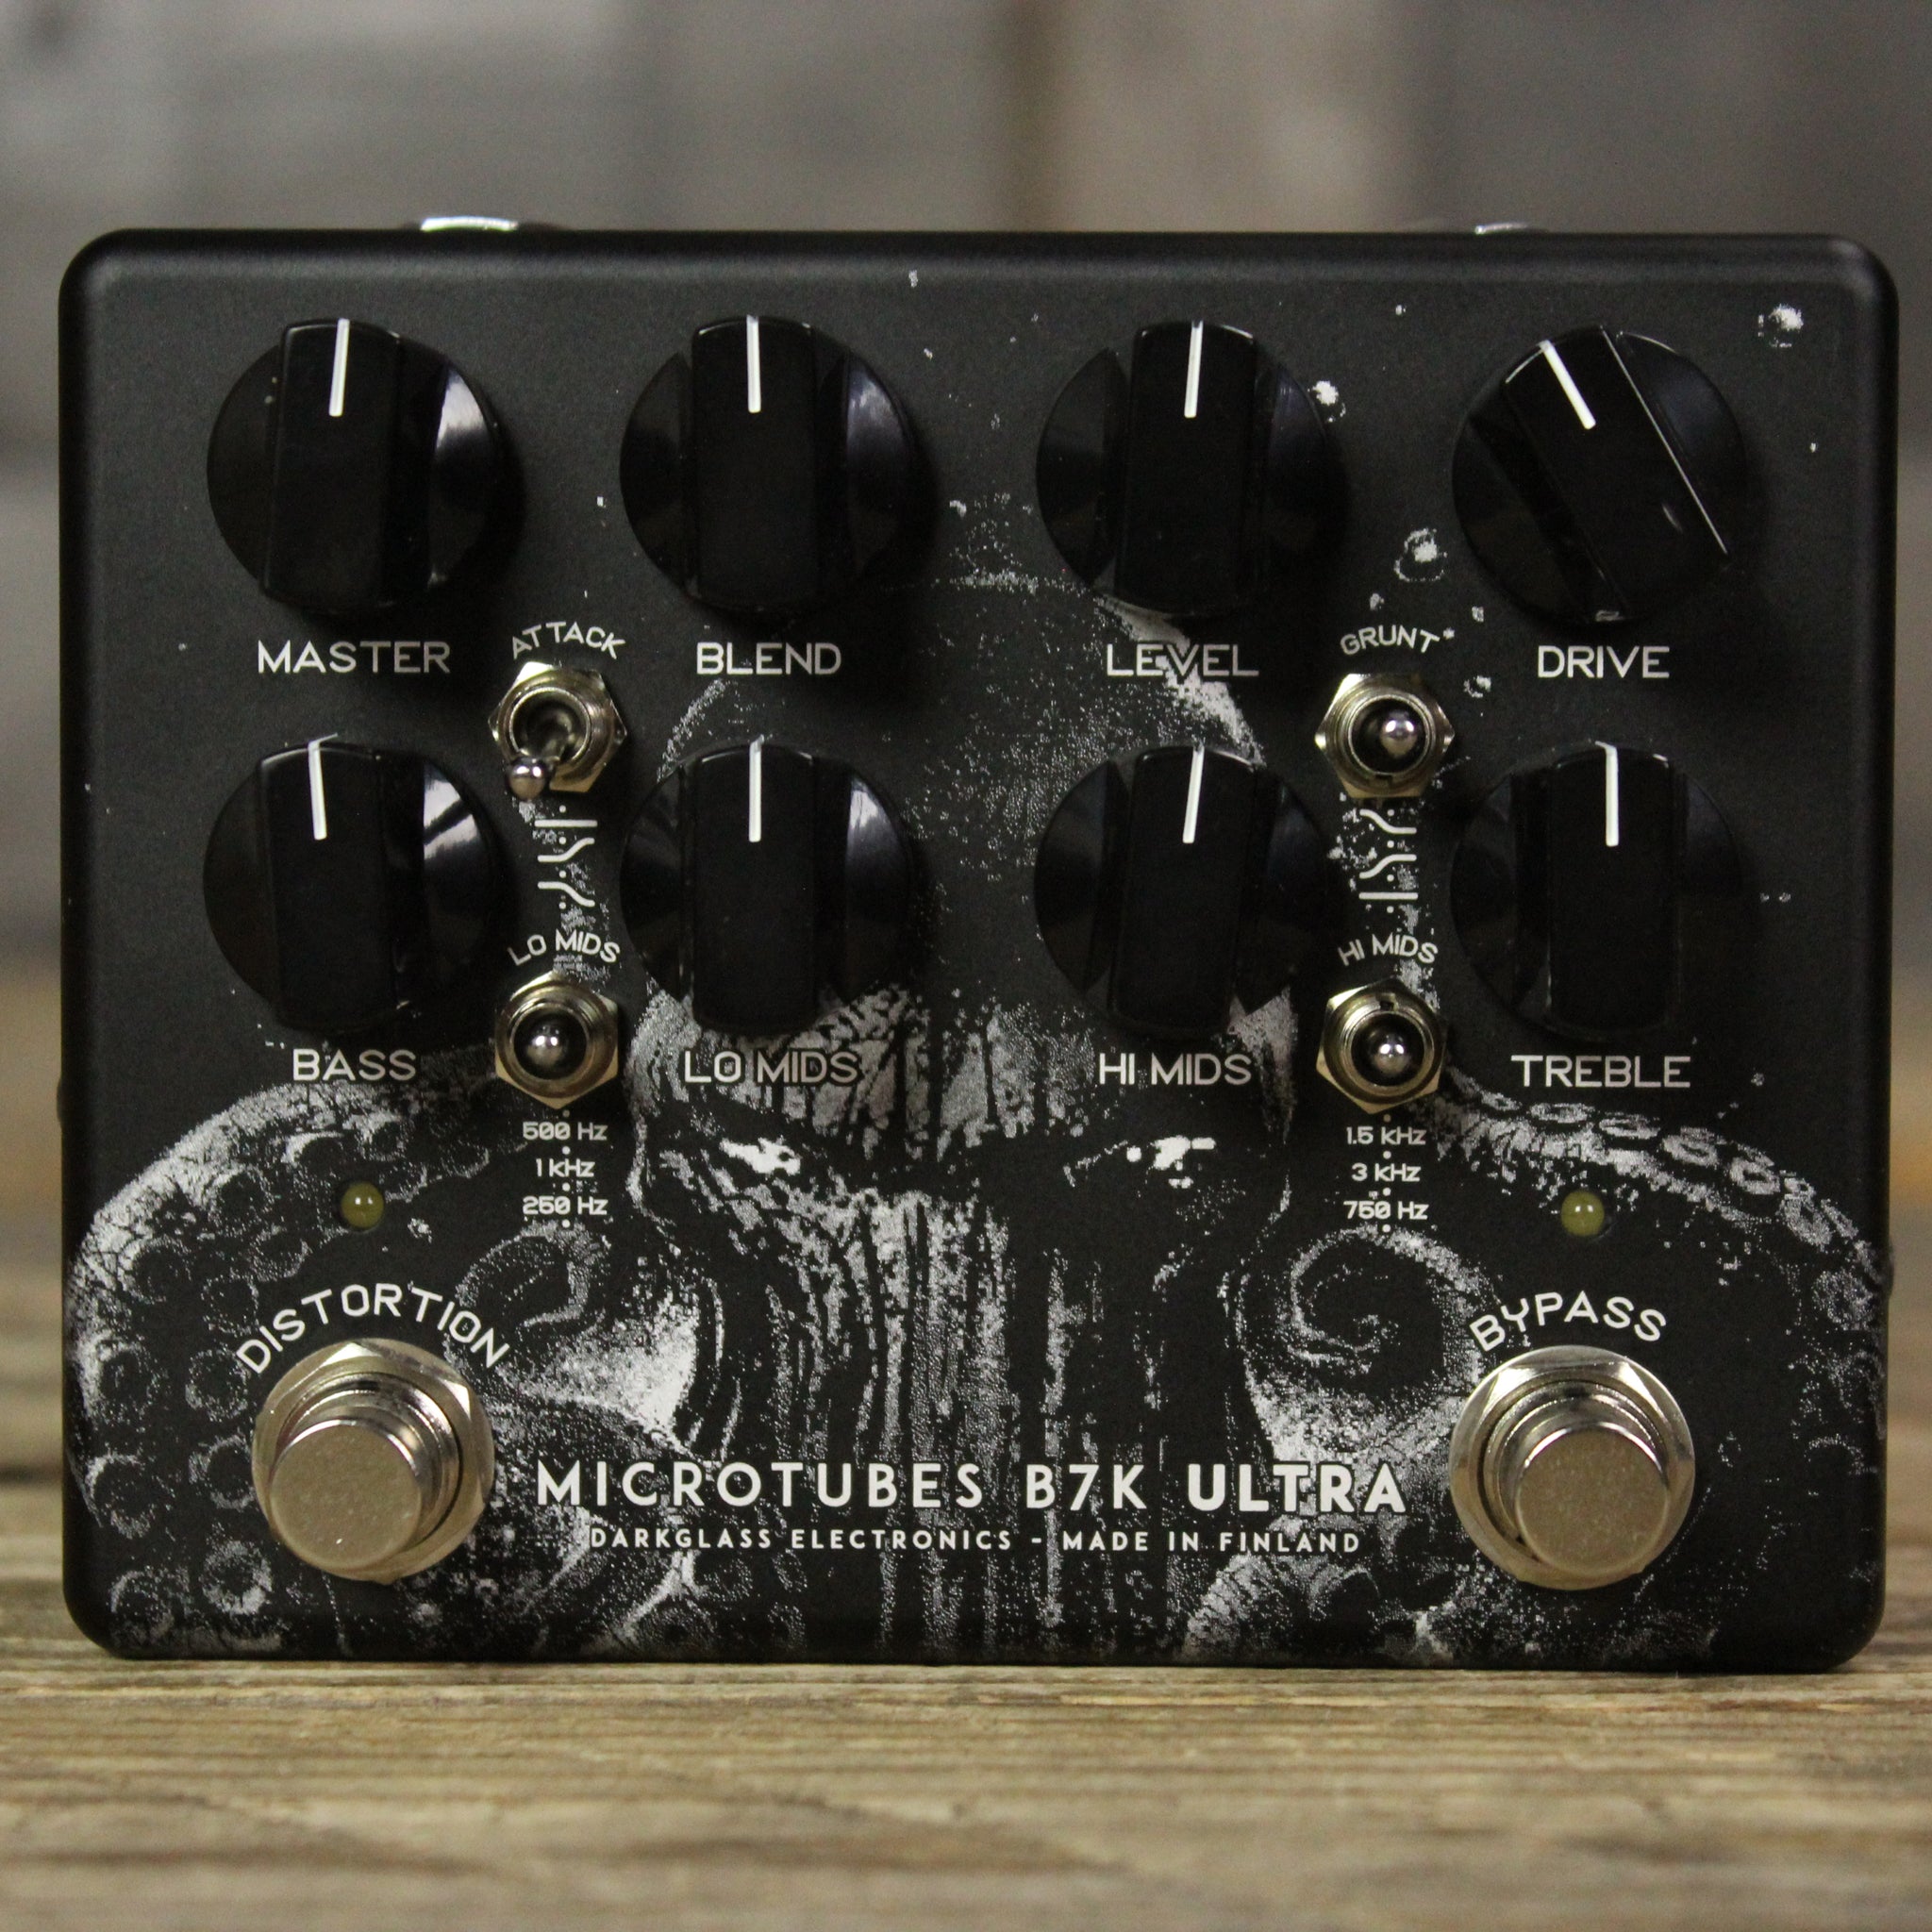 Darkglass MicroTubes B7K ULTRA V2 “THE SQUID” Limited Edition